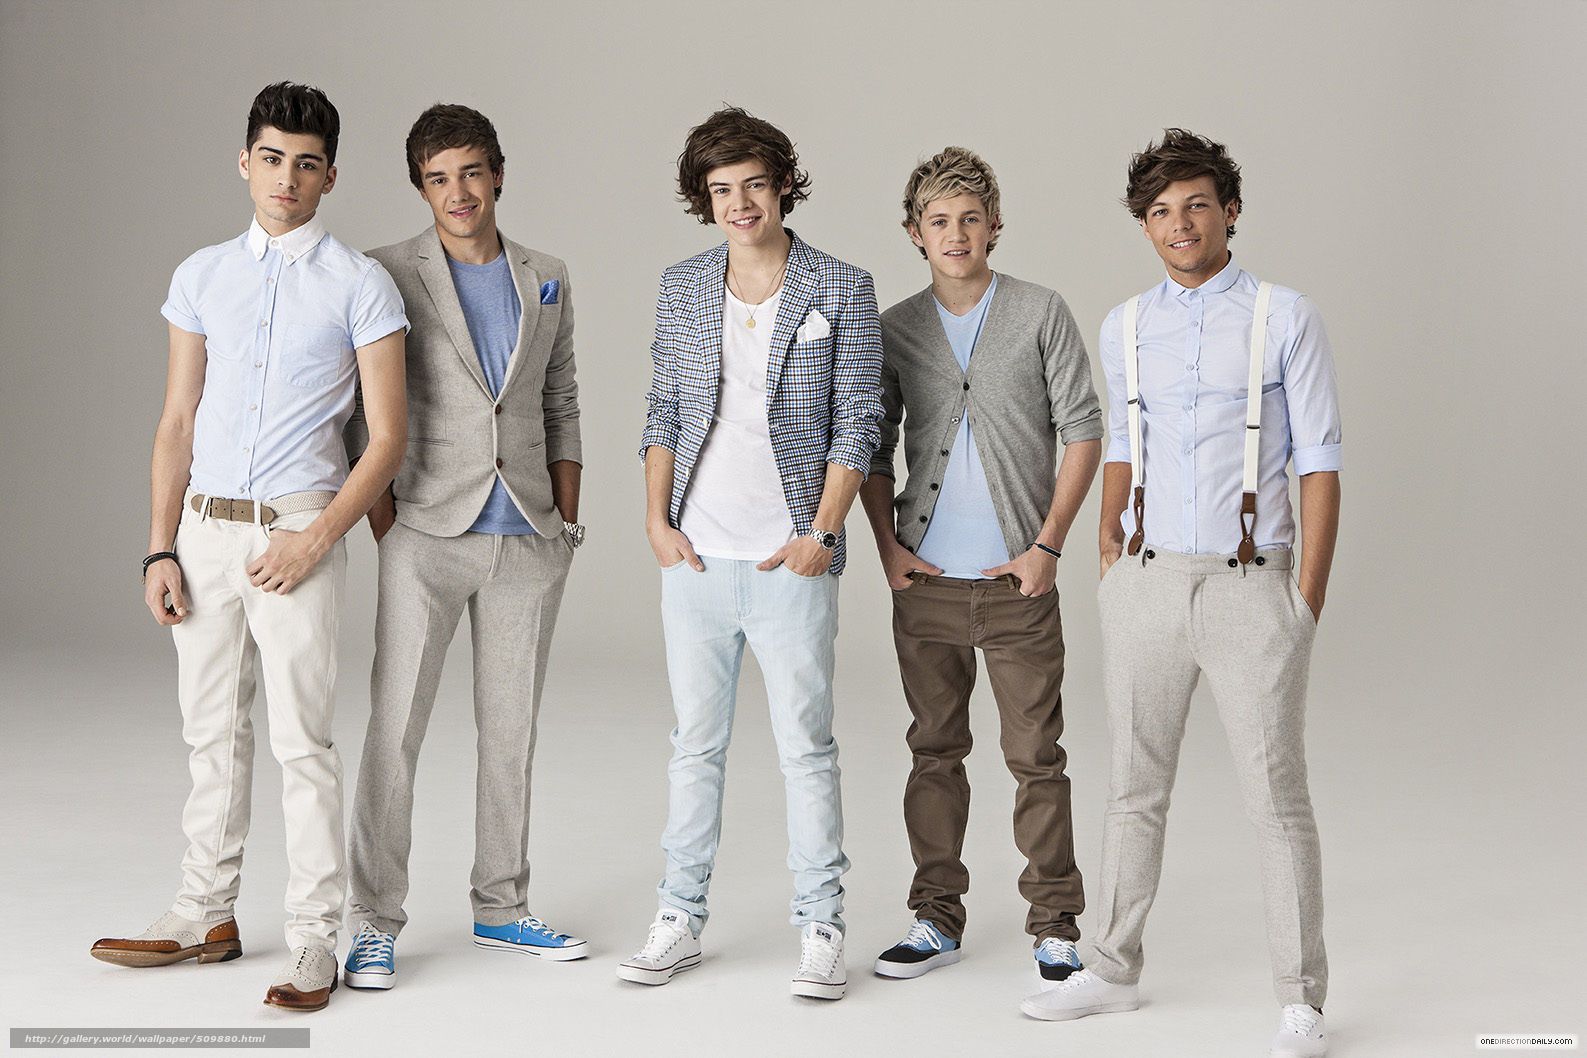 Download wallpaper one direction, Niall Horan, Harry Styles, Louis Tomlinson free desktop wallpaper in the resolution 1587x1058